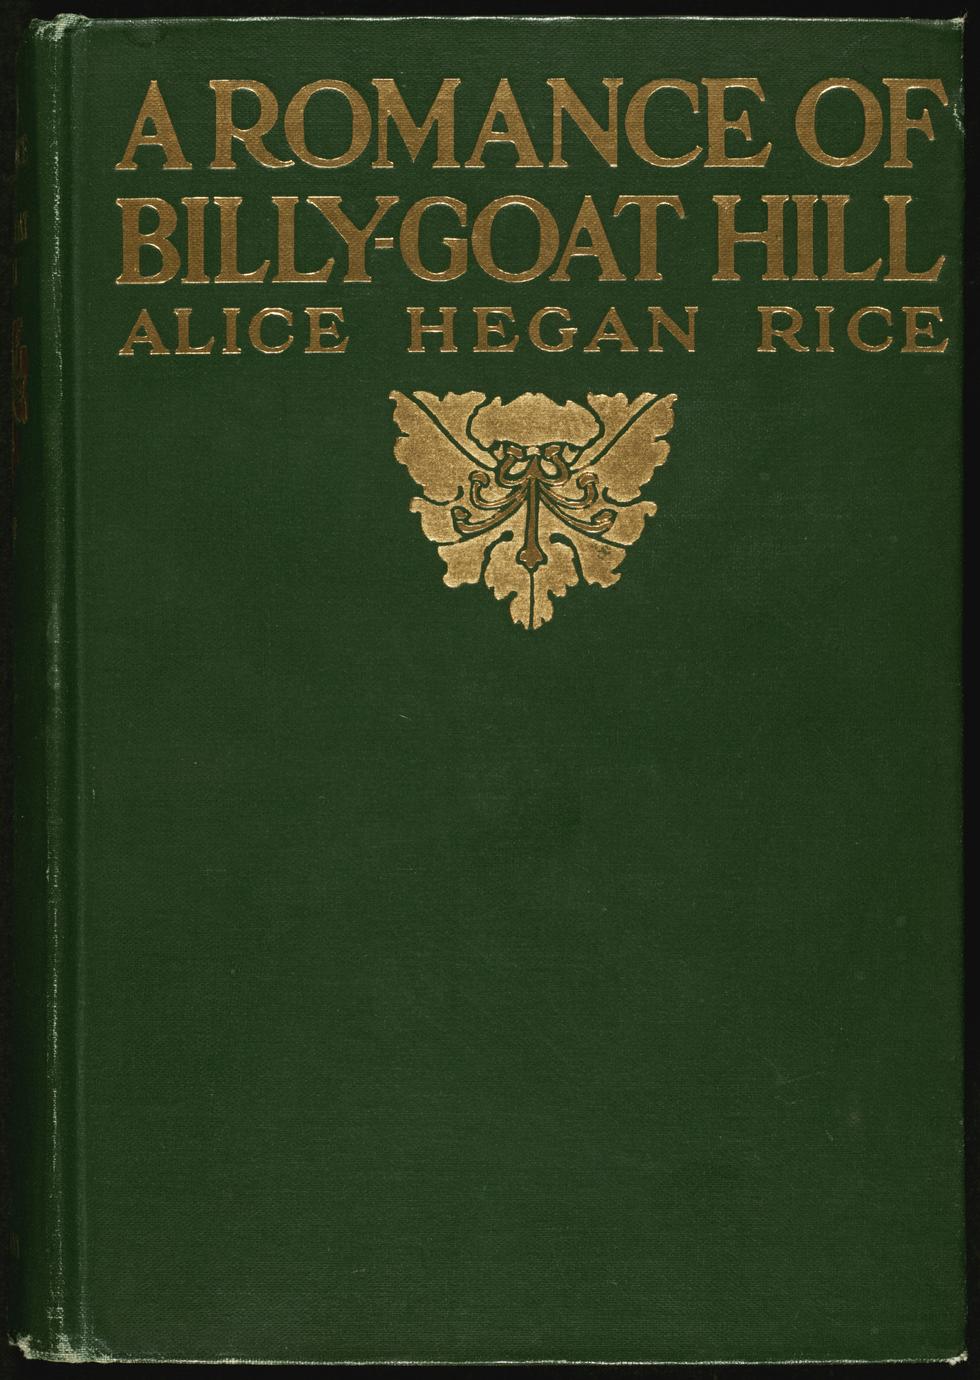 A romance of Billy-goat Hill (1 of 2)